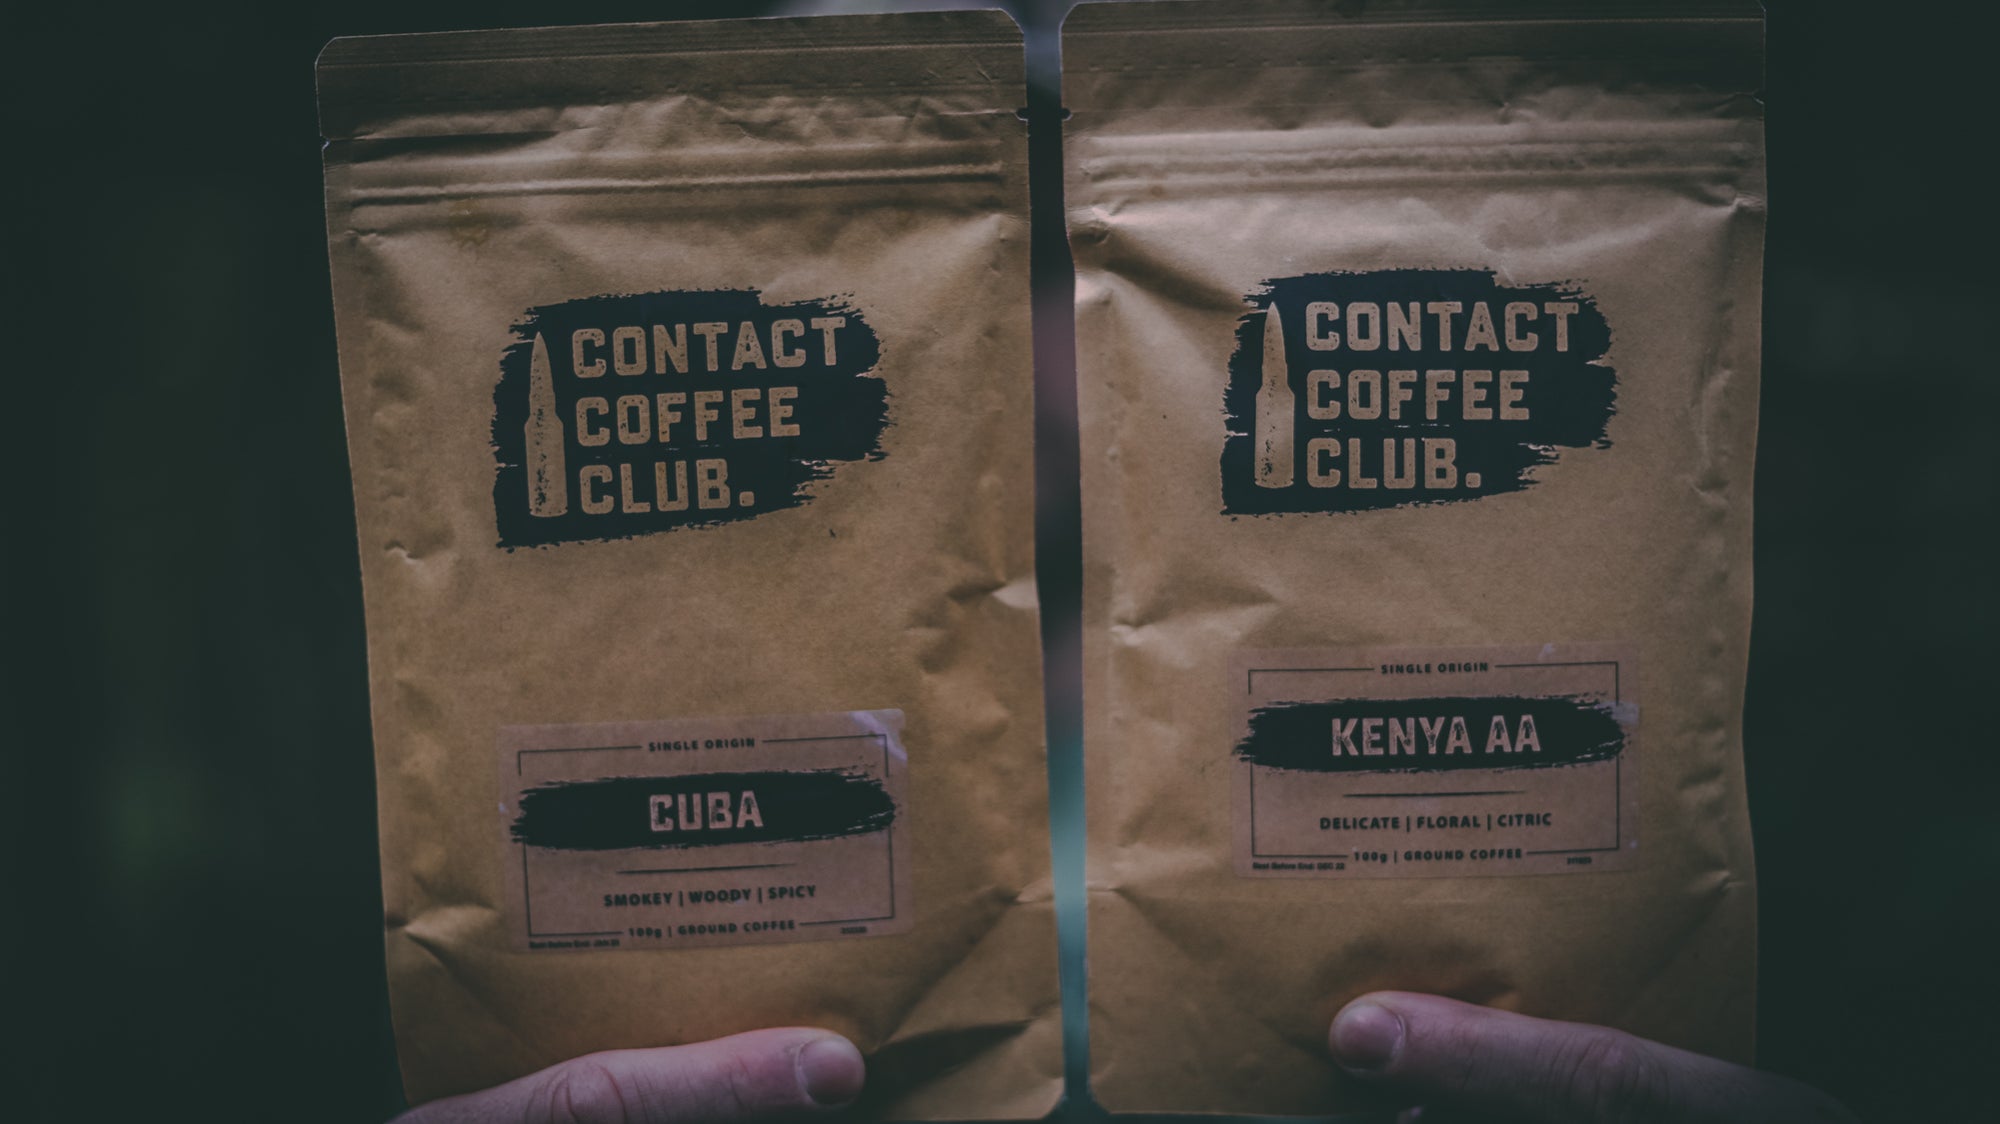 Two bags of coffee from contact coffee subscription